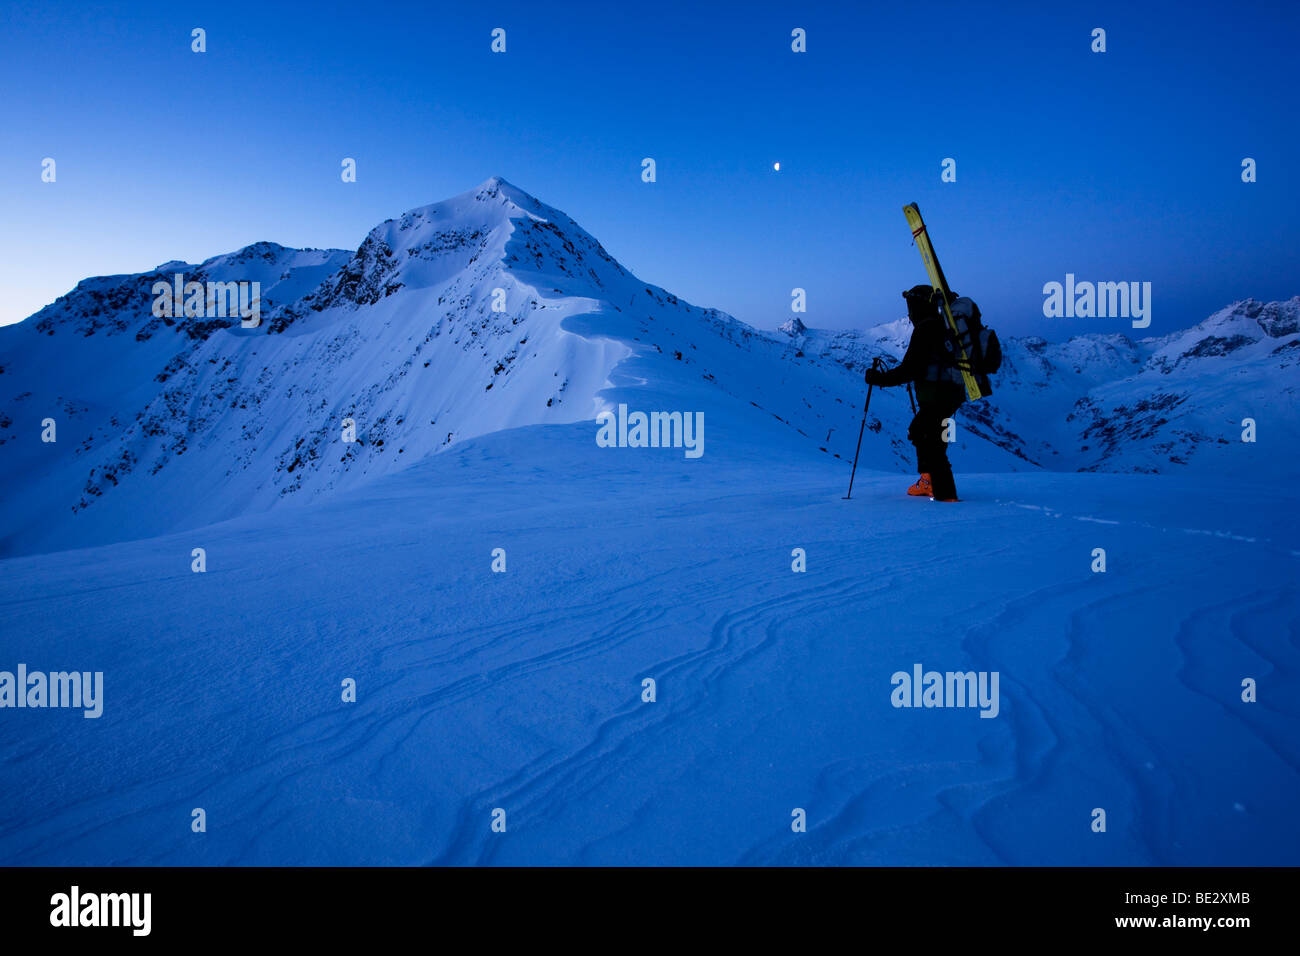 Ski touring in front of the sunrise, Verwall Alps, North Tyrol, Austria, Europe Stock Photo